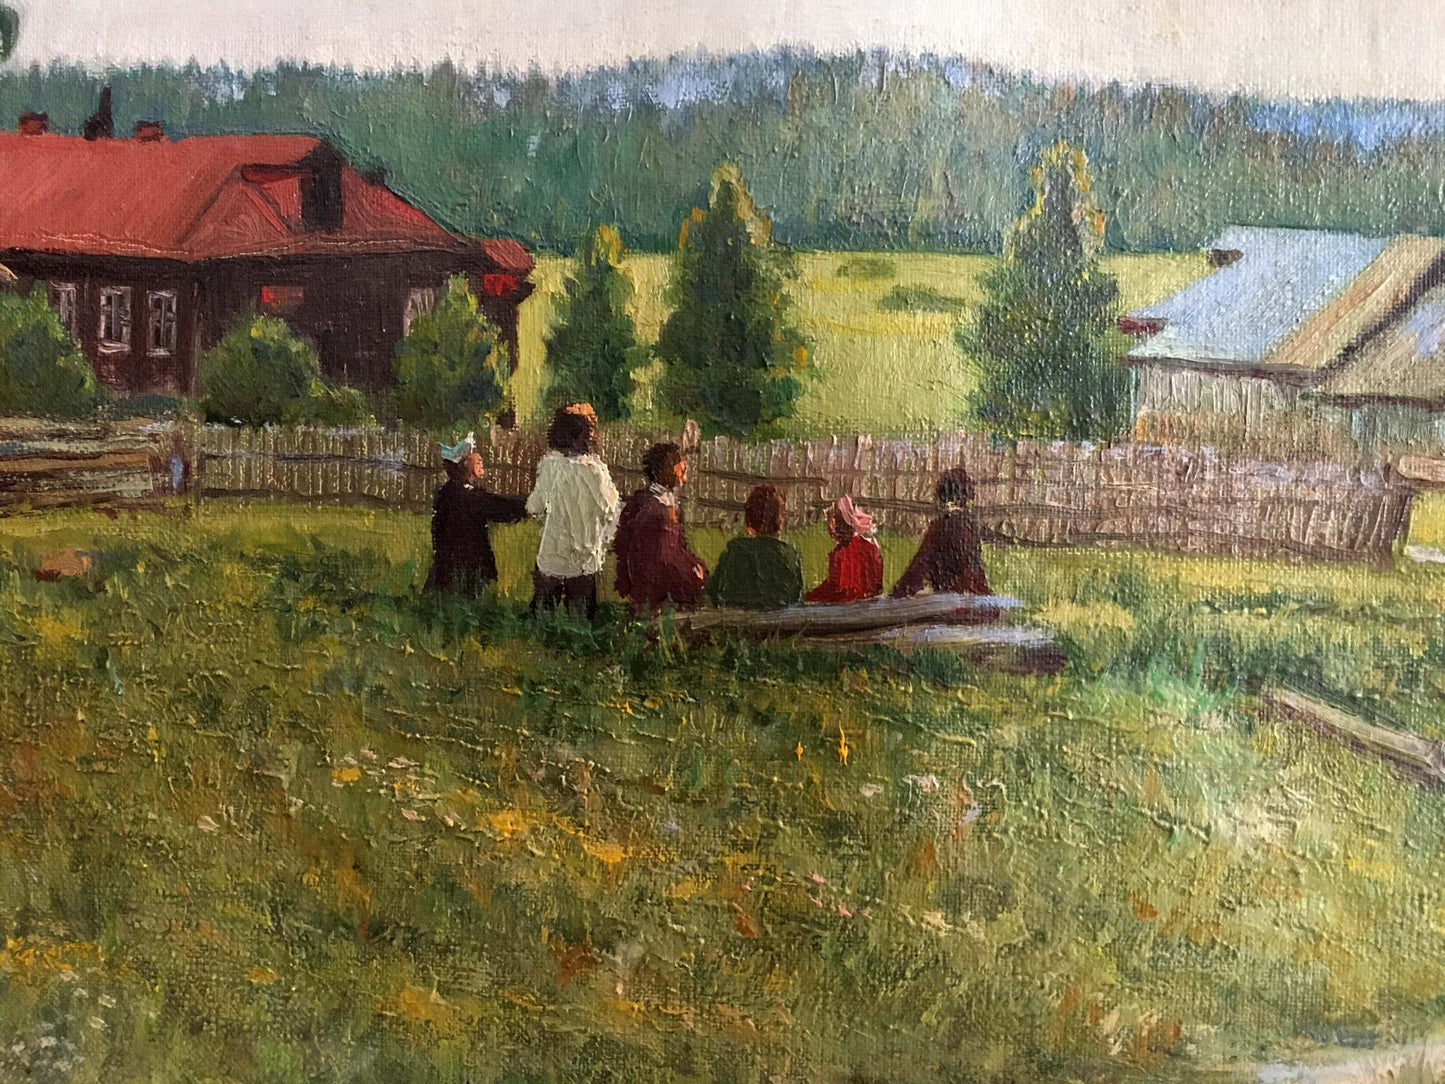 Children enjoying a moment of relaxation in the oil painting